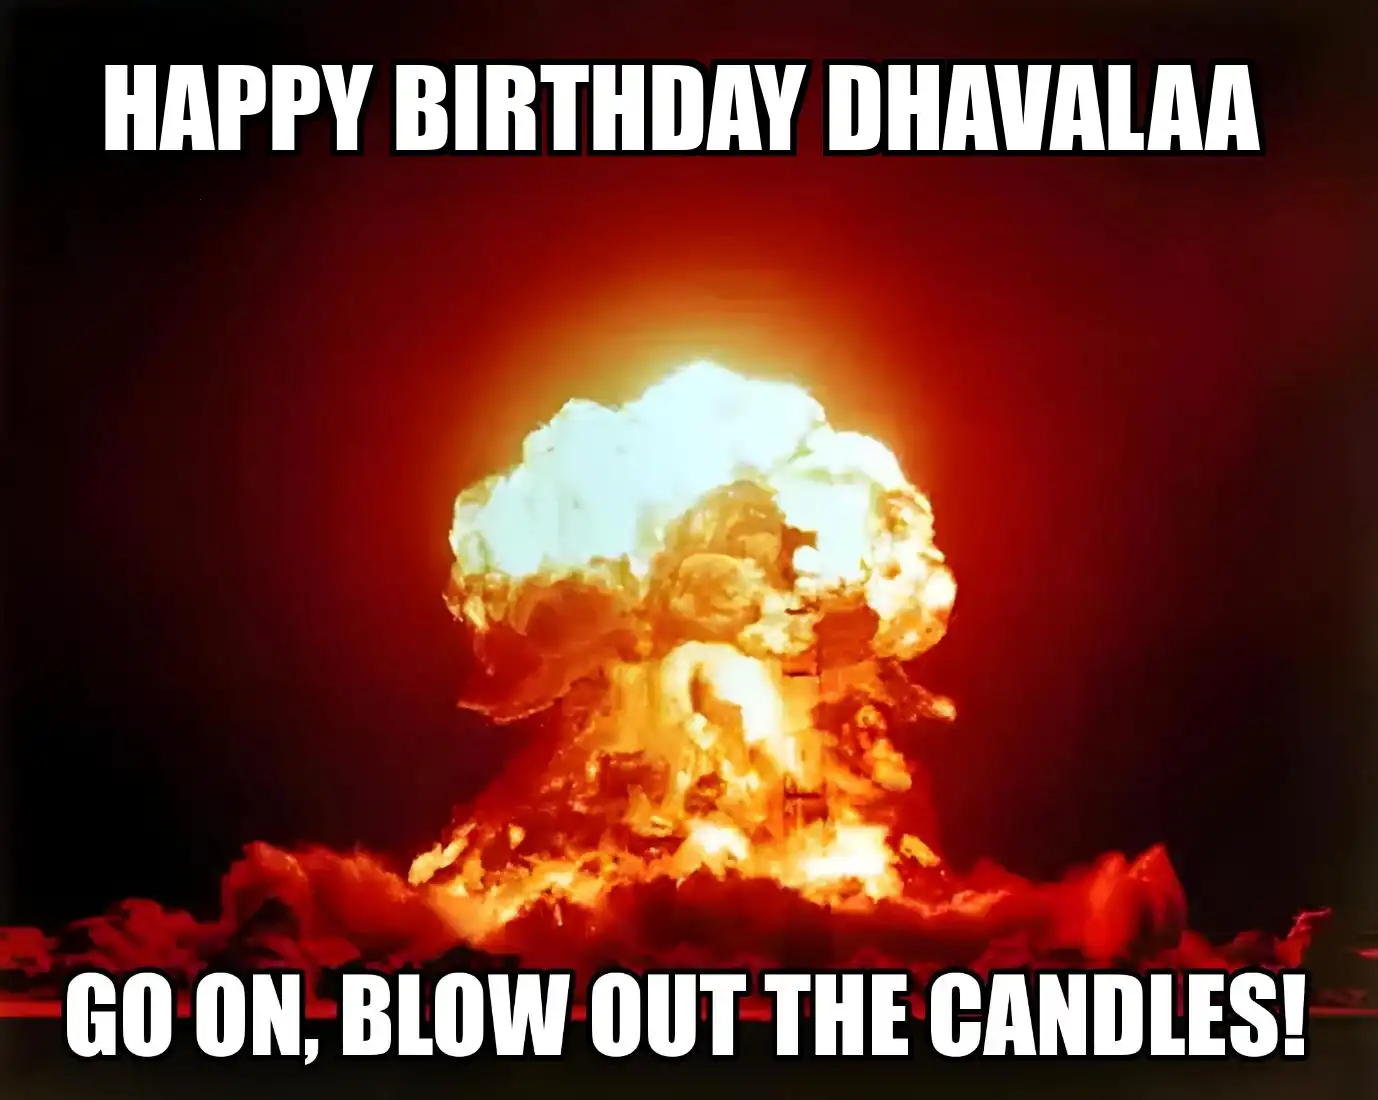 Happy Birthday Dhavalaa Go On Blow Out The Candles Meme